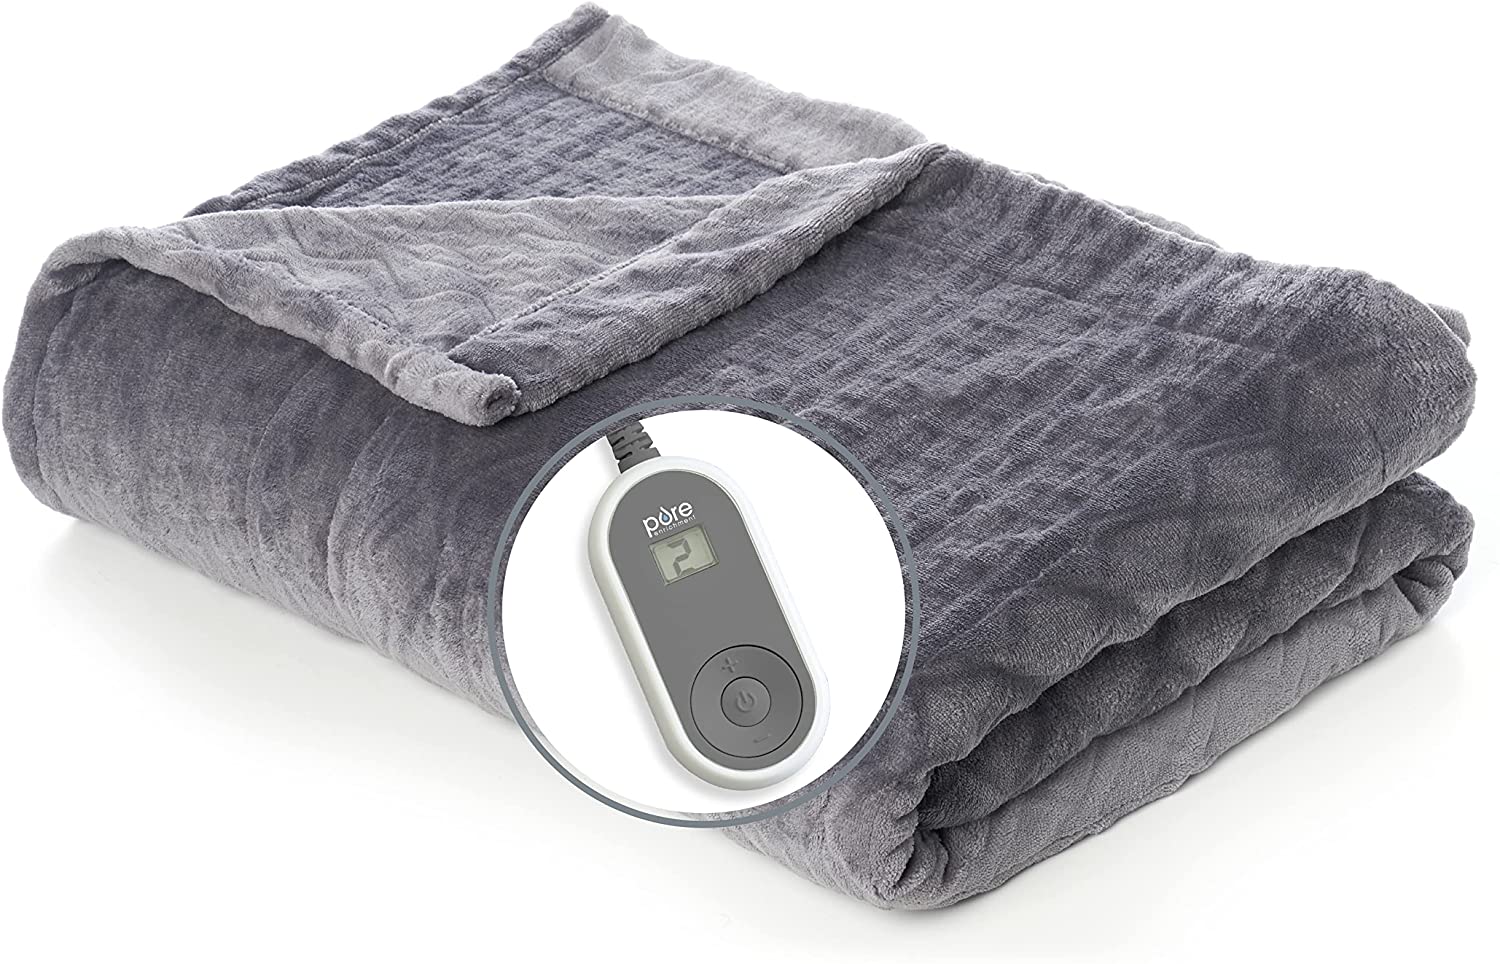 best v day gifts for girlfriends pure enrichment heated blanket